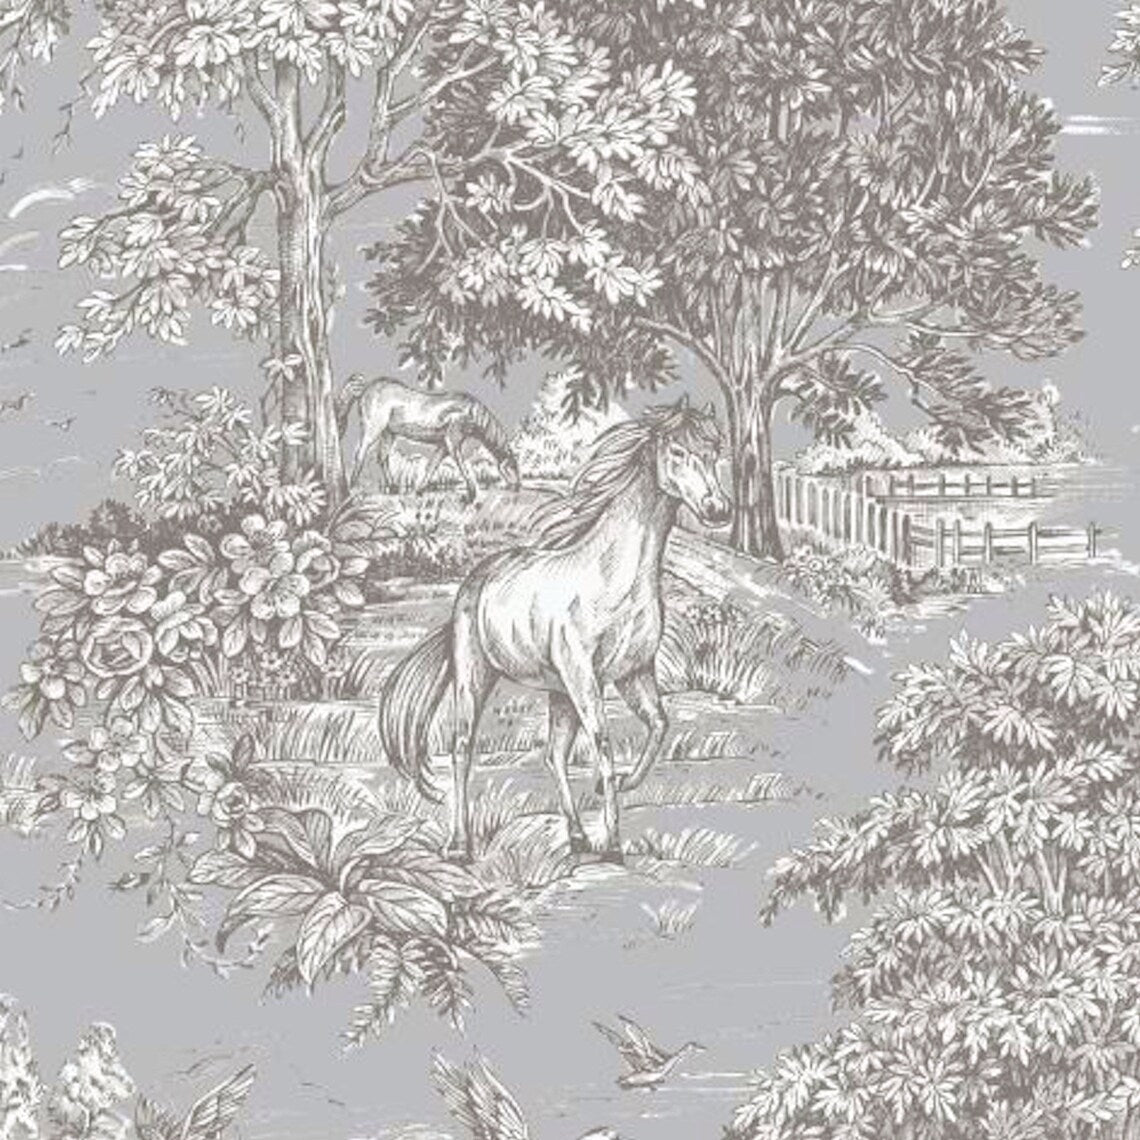 duvet cover in Yellowstone Dove Blue Gray Country Toile- Horses, Deer, Dogs- Large Scale